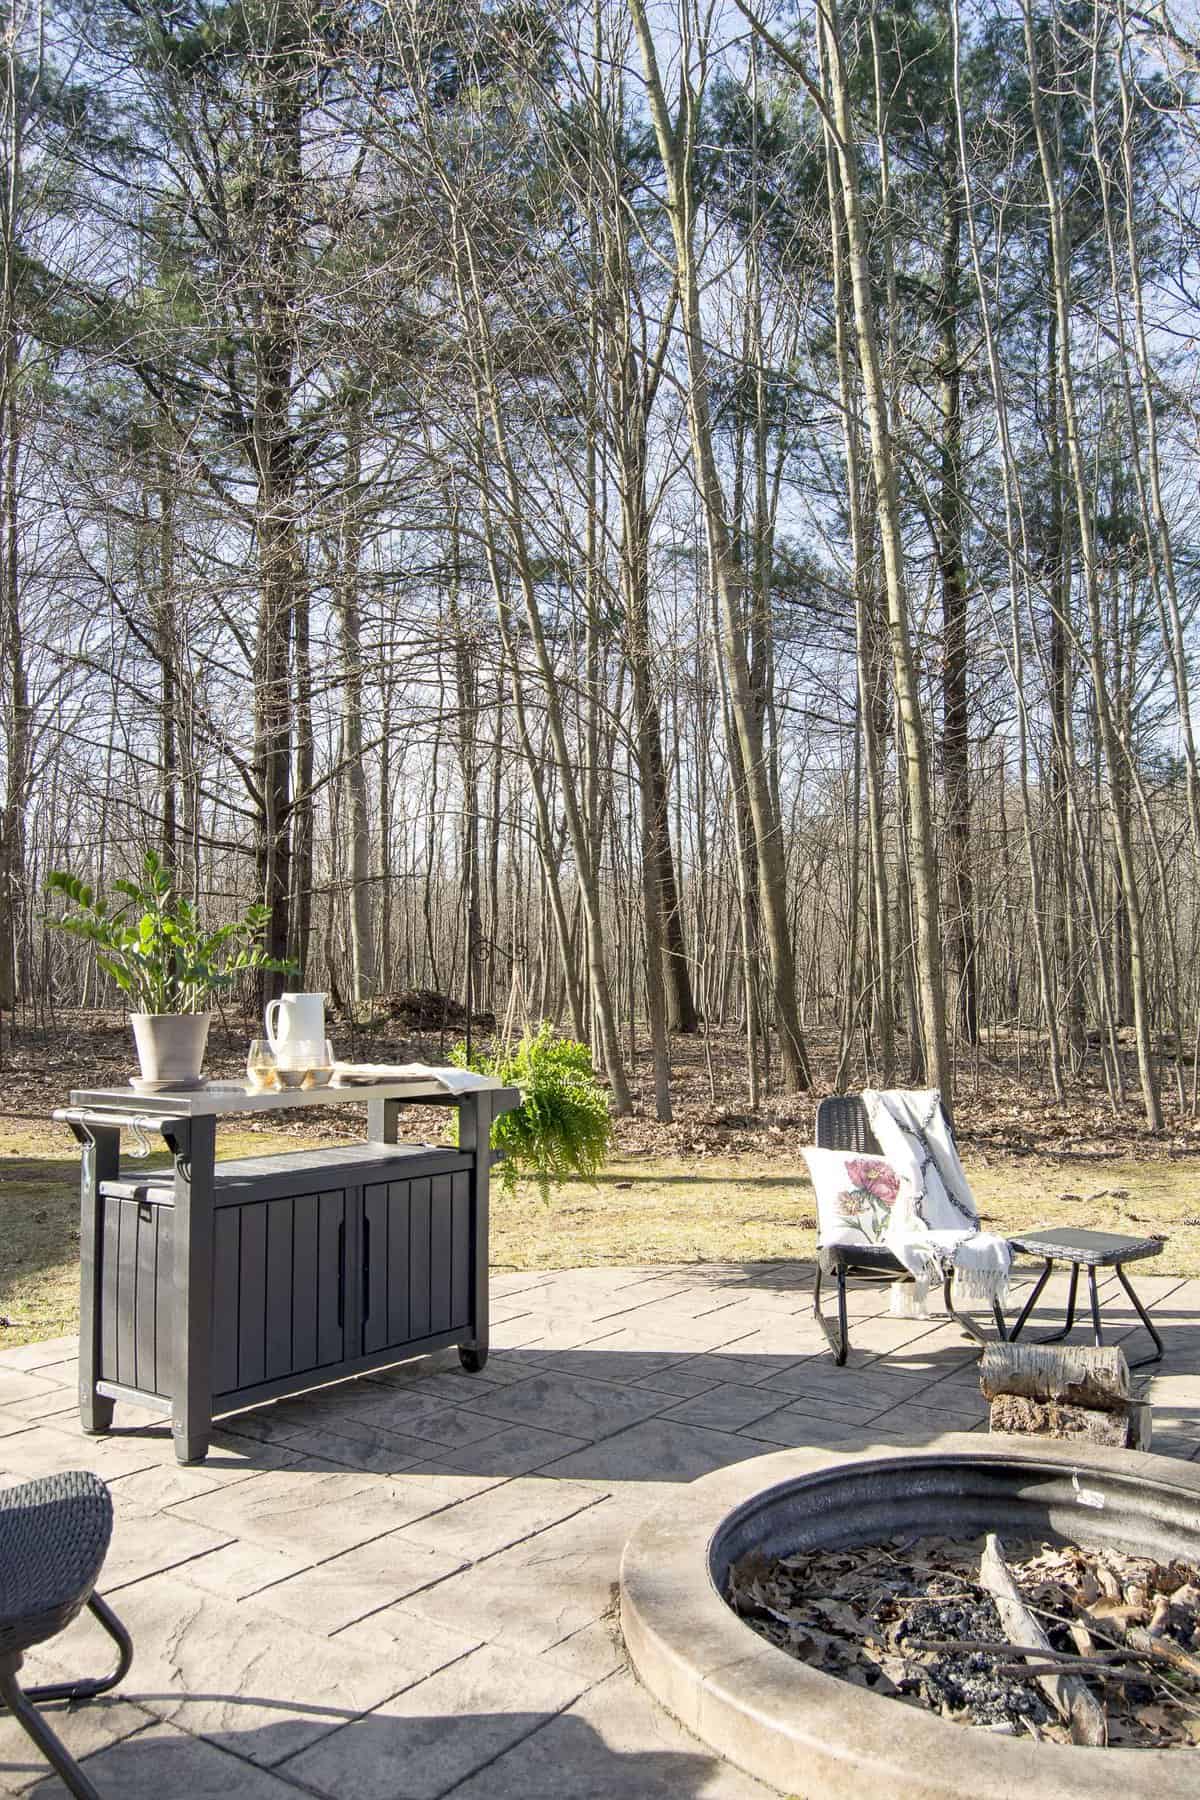 Are you excited for outdoor entertaining? Today I'm sharing my stamped concrete fire pit design plan as I gear up for the warm weather season! #fromhousetohaven #stampedconcrete #patiodesign